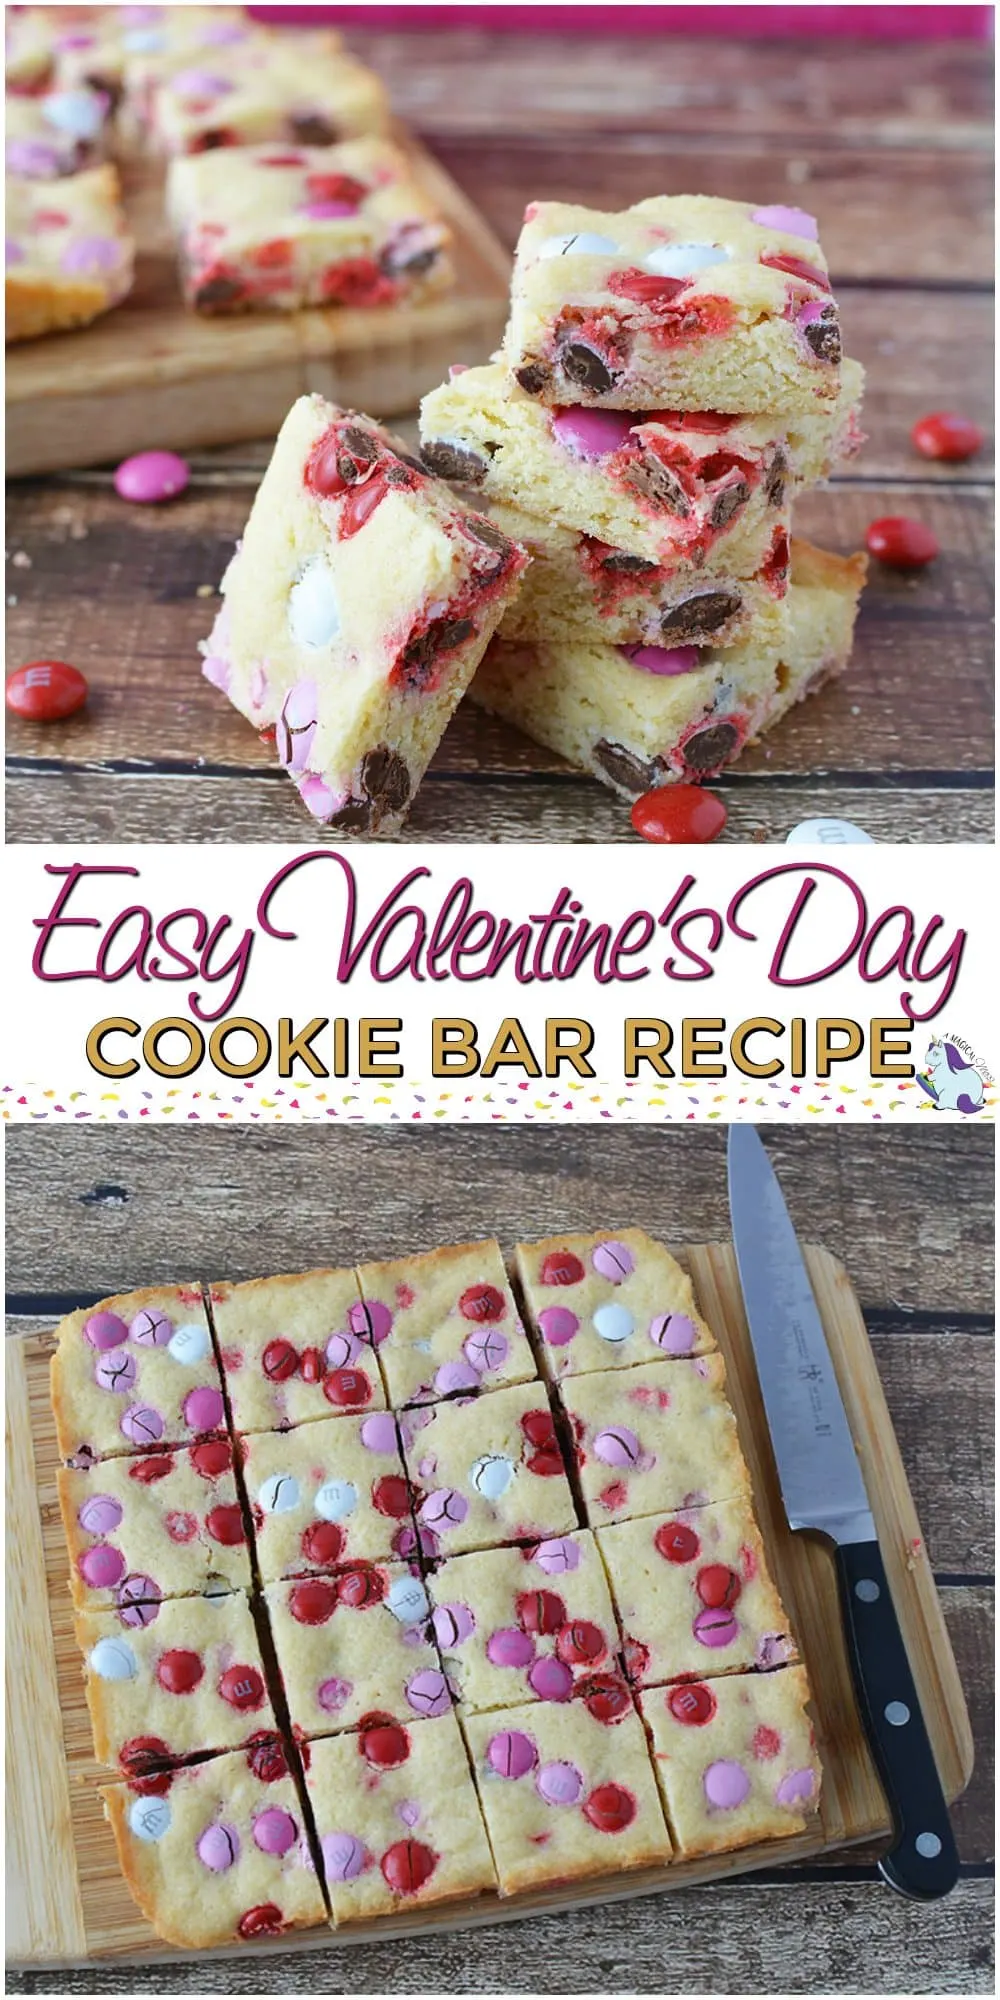 Easy Cookie Bar Recipe that we Love for Valentine's Day